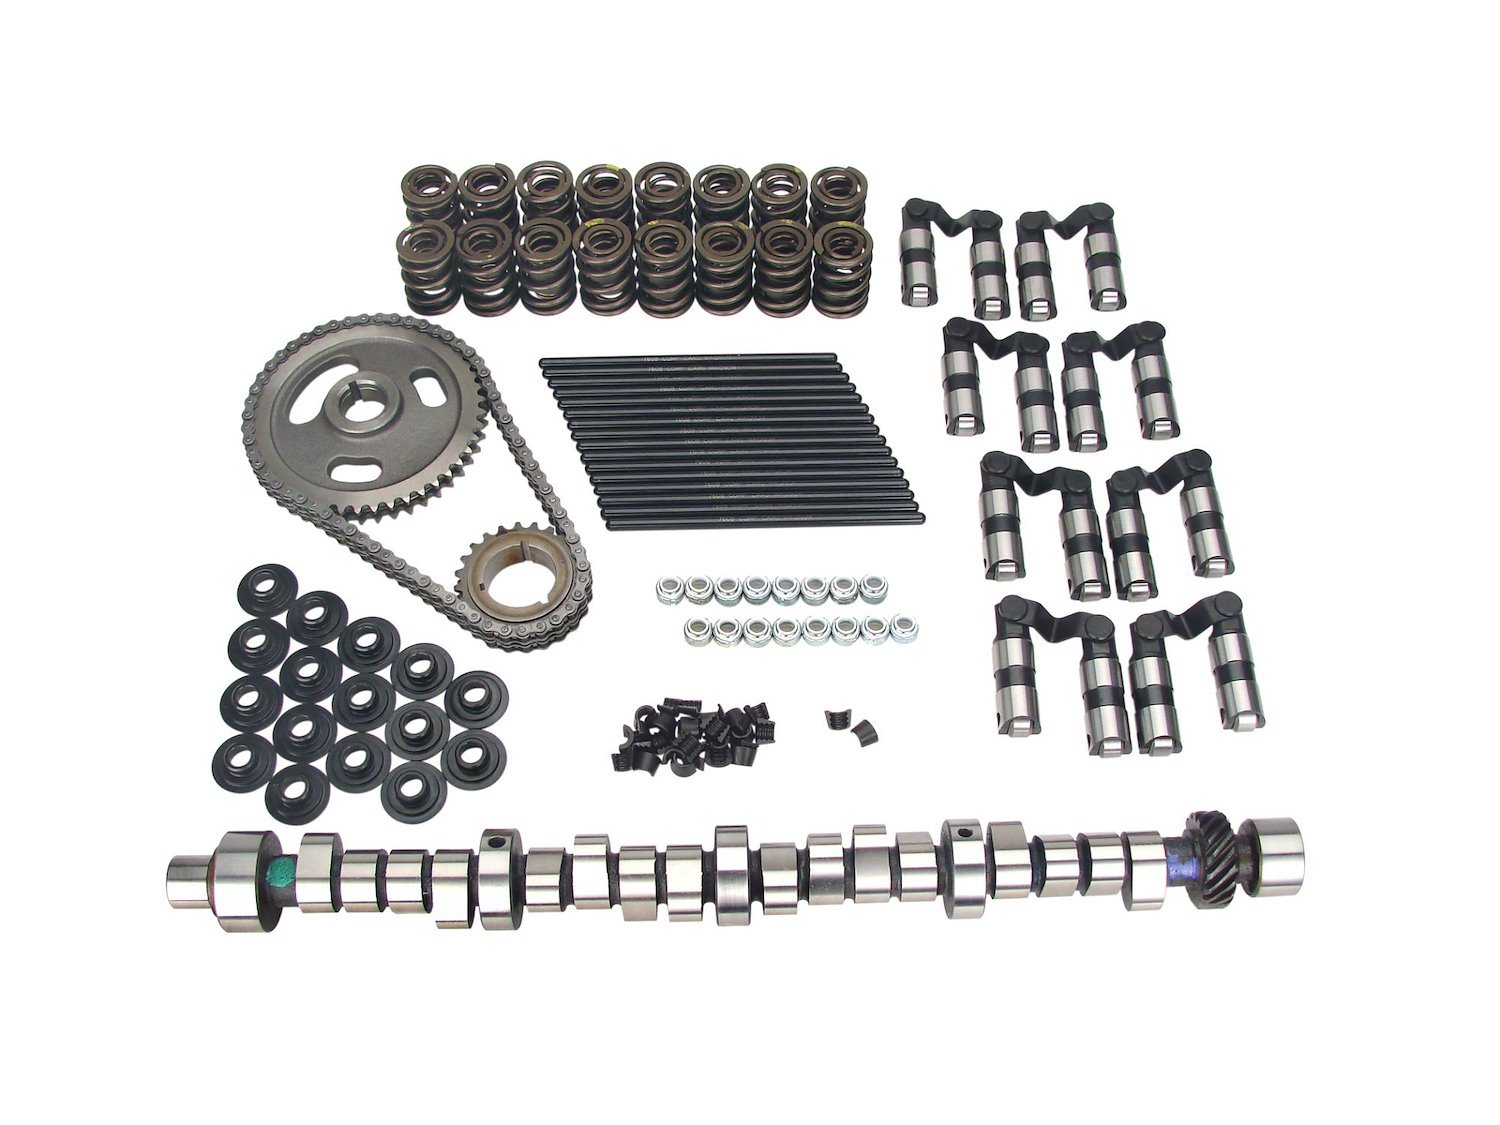 Big Mutha Thumpr Retro-Fit Hydraulic Roller Camshaft Complete Kit Lift: .533"/.519"